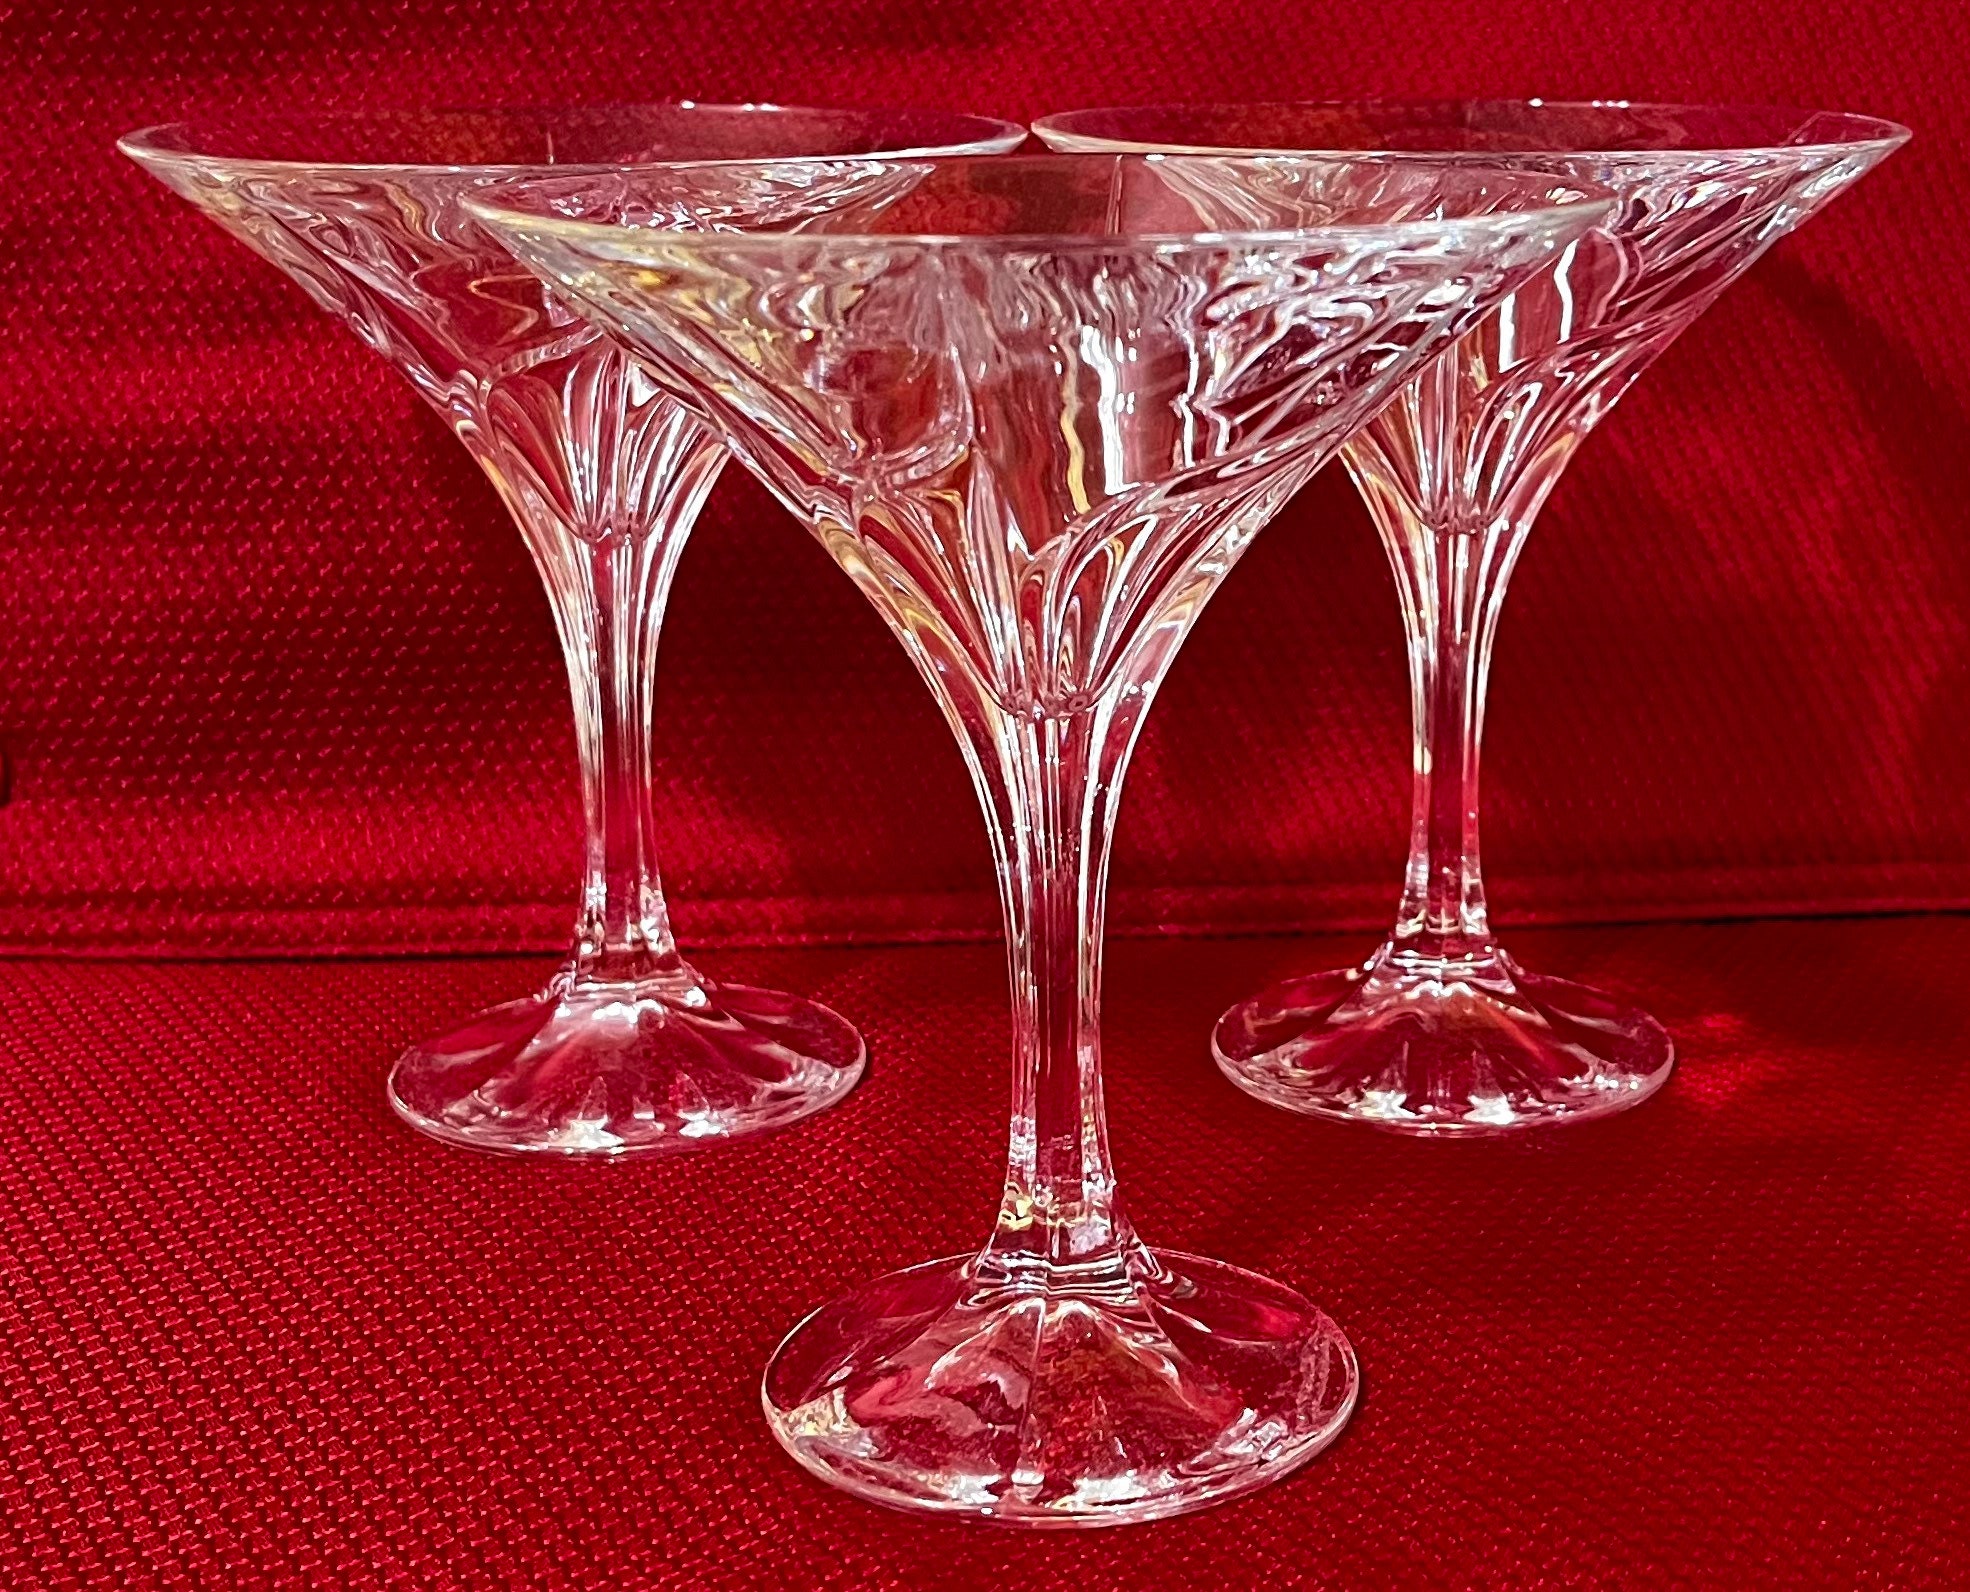 2 MIKASA Abstract Martini Glasses CHEERS Cocktail Glasses 